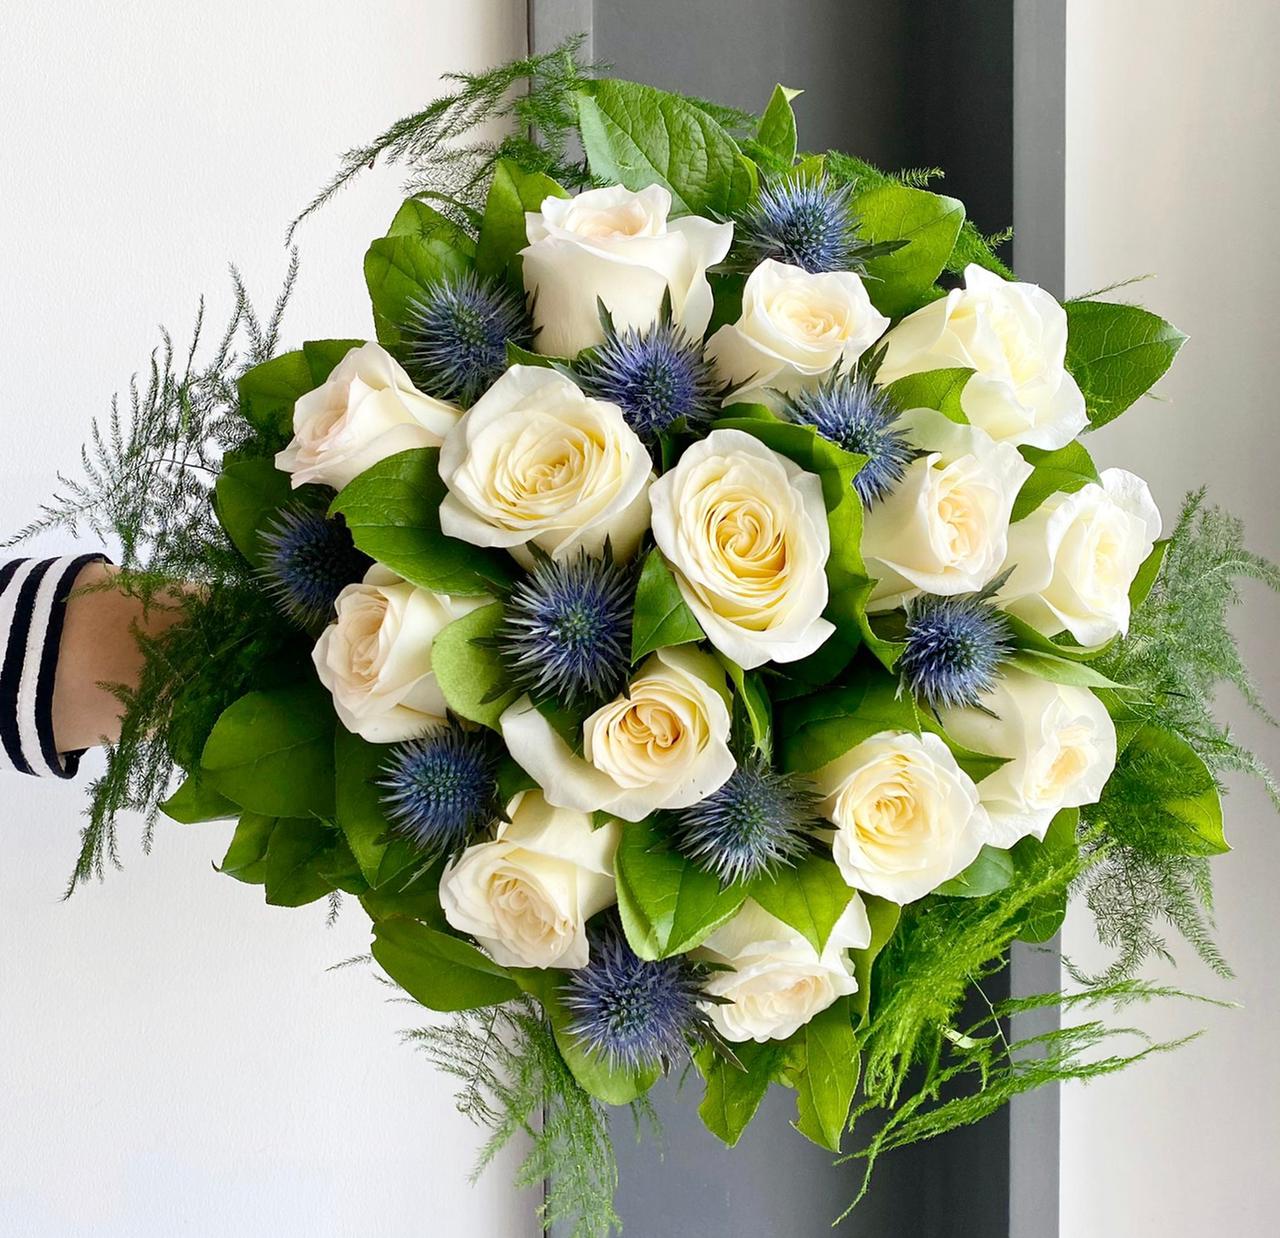 Florette NICE - A bouquet with lots of beautiful white garden roses, blue eryngiums, asparagus, and lemon leaves.